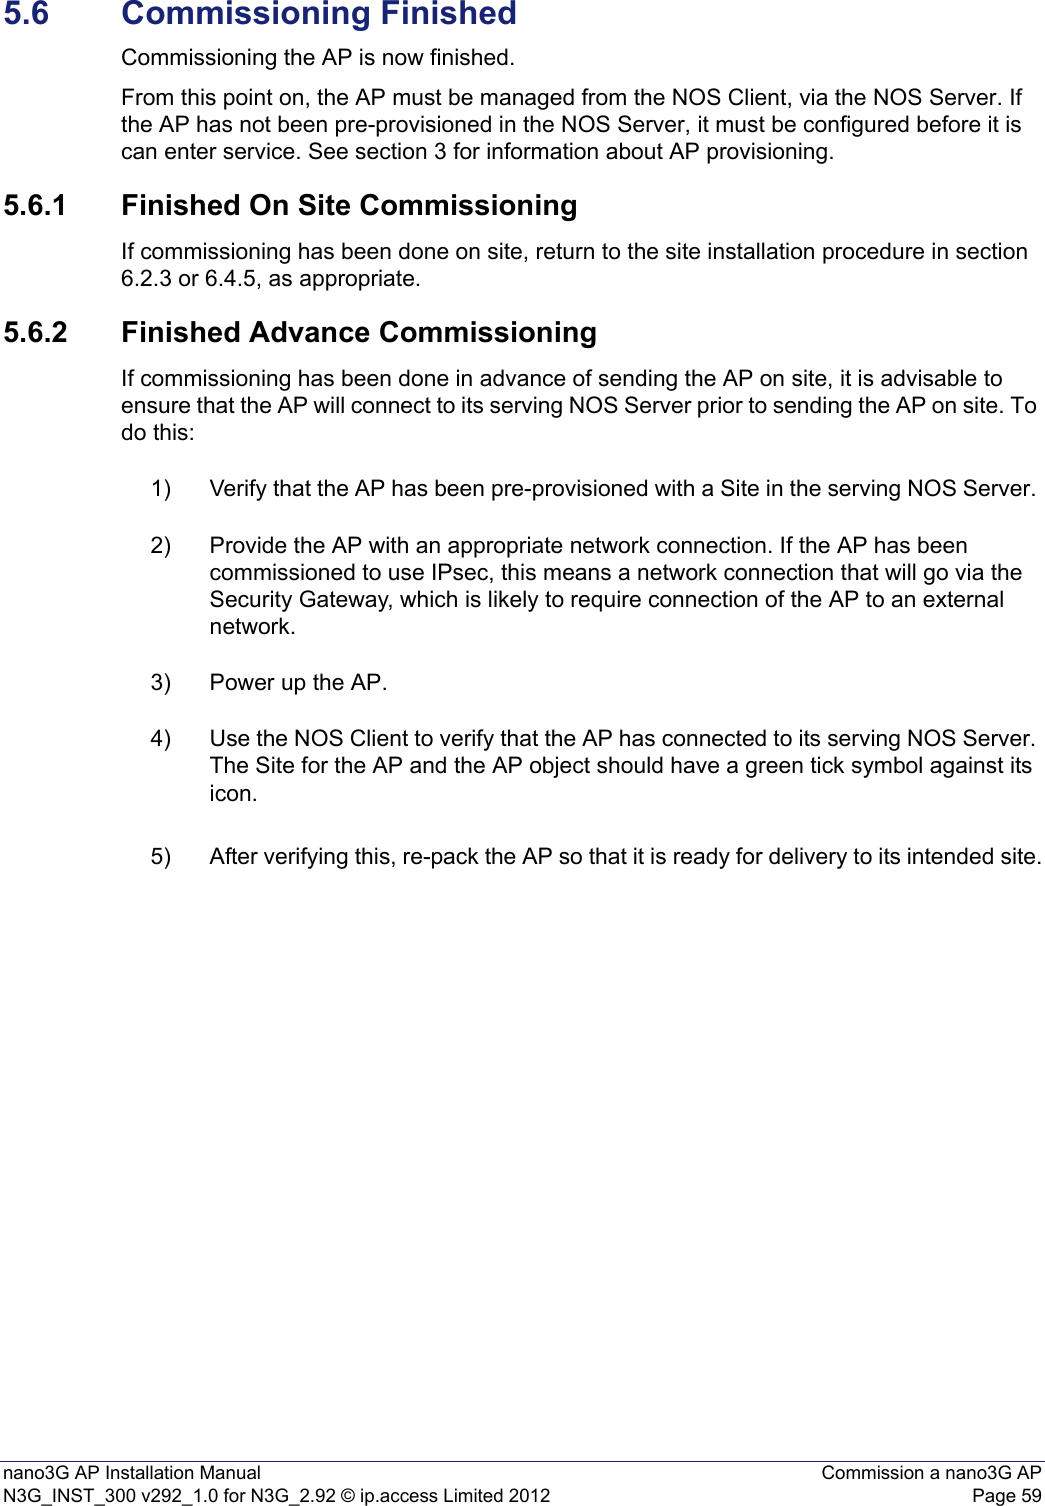 nano3G AP Installation Manual Commission a nano3G APN3G_INST_300 v292_1.0 for N3G_2.92 © ip.access Limited 2012 Page 595.6 Commissioning FinishedCommissioning the AP is now finished. From this point on, the AP must be managed from the NOS Client, via the NOS Server. If the AP has not been pre-provisioned in the NOS Server, it must be configured before it is can enter service. See section 3 for information about AP provisioning.5.6.1 Finished On Site CommissioningIf commissioning has been done on site, return to the site installation procedure in section 6.2.3 or 6.4.5, as appropriate. 5.6.2 Finished Advance CommissioningIf commissioning has been done in advance of sending the AP on site, it is advisable to ensure that the AP will connect to its serving NOS Server prior to sending the AP on site. To do this:1) Verify that the AP has been pre-provisioned with a Site in the serving NOS Server. 2) Provide the AP with an appropriate network connection. If the AP has been commissioned to use IPsec, this means a network connection that will go via the Security Gateway, which is likely to require connection of the AP to an external network. 3) Power up the AP. 4) Use the NOS Client to verify that the AP has connected to its serving NOS Server. The Site for the AP and the AP object should have a green tick symbol against its icon. 5) After verifying this, re-pack the AP so that it is ready for delivery to its intended site.